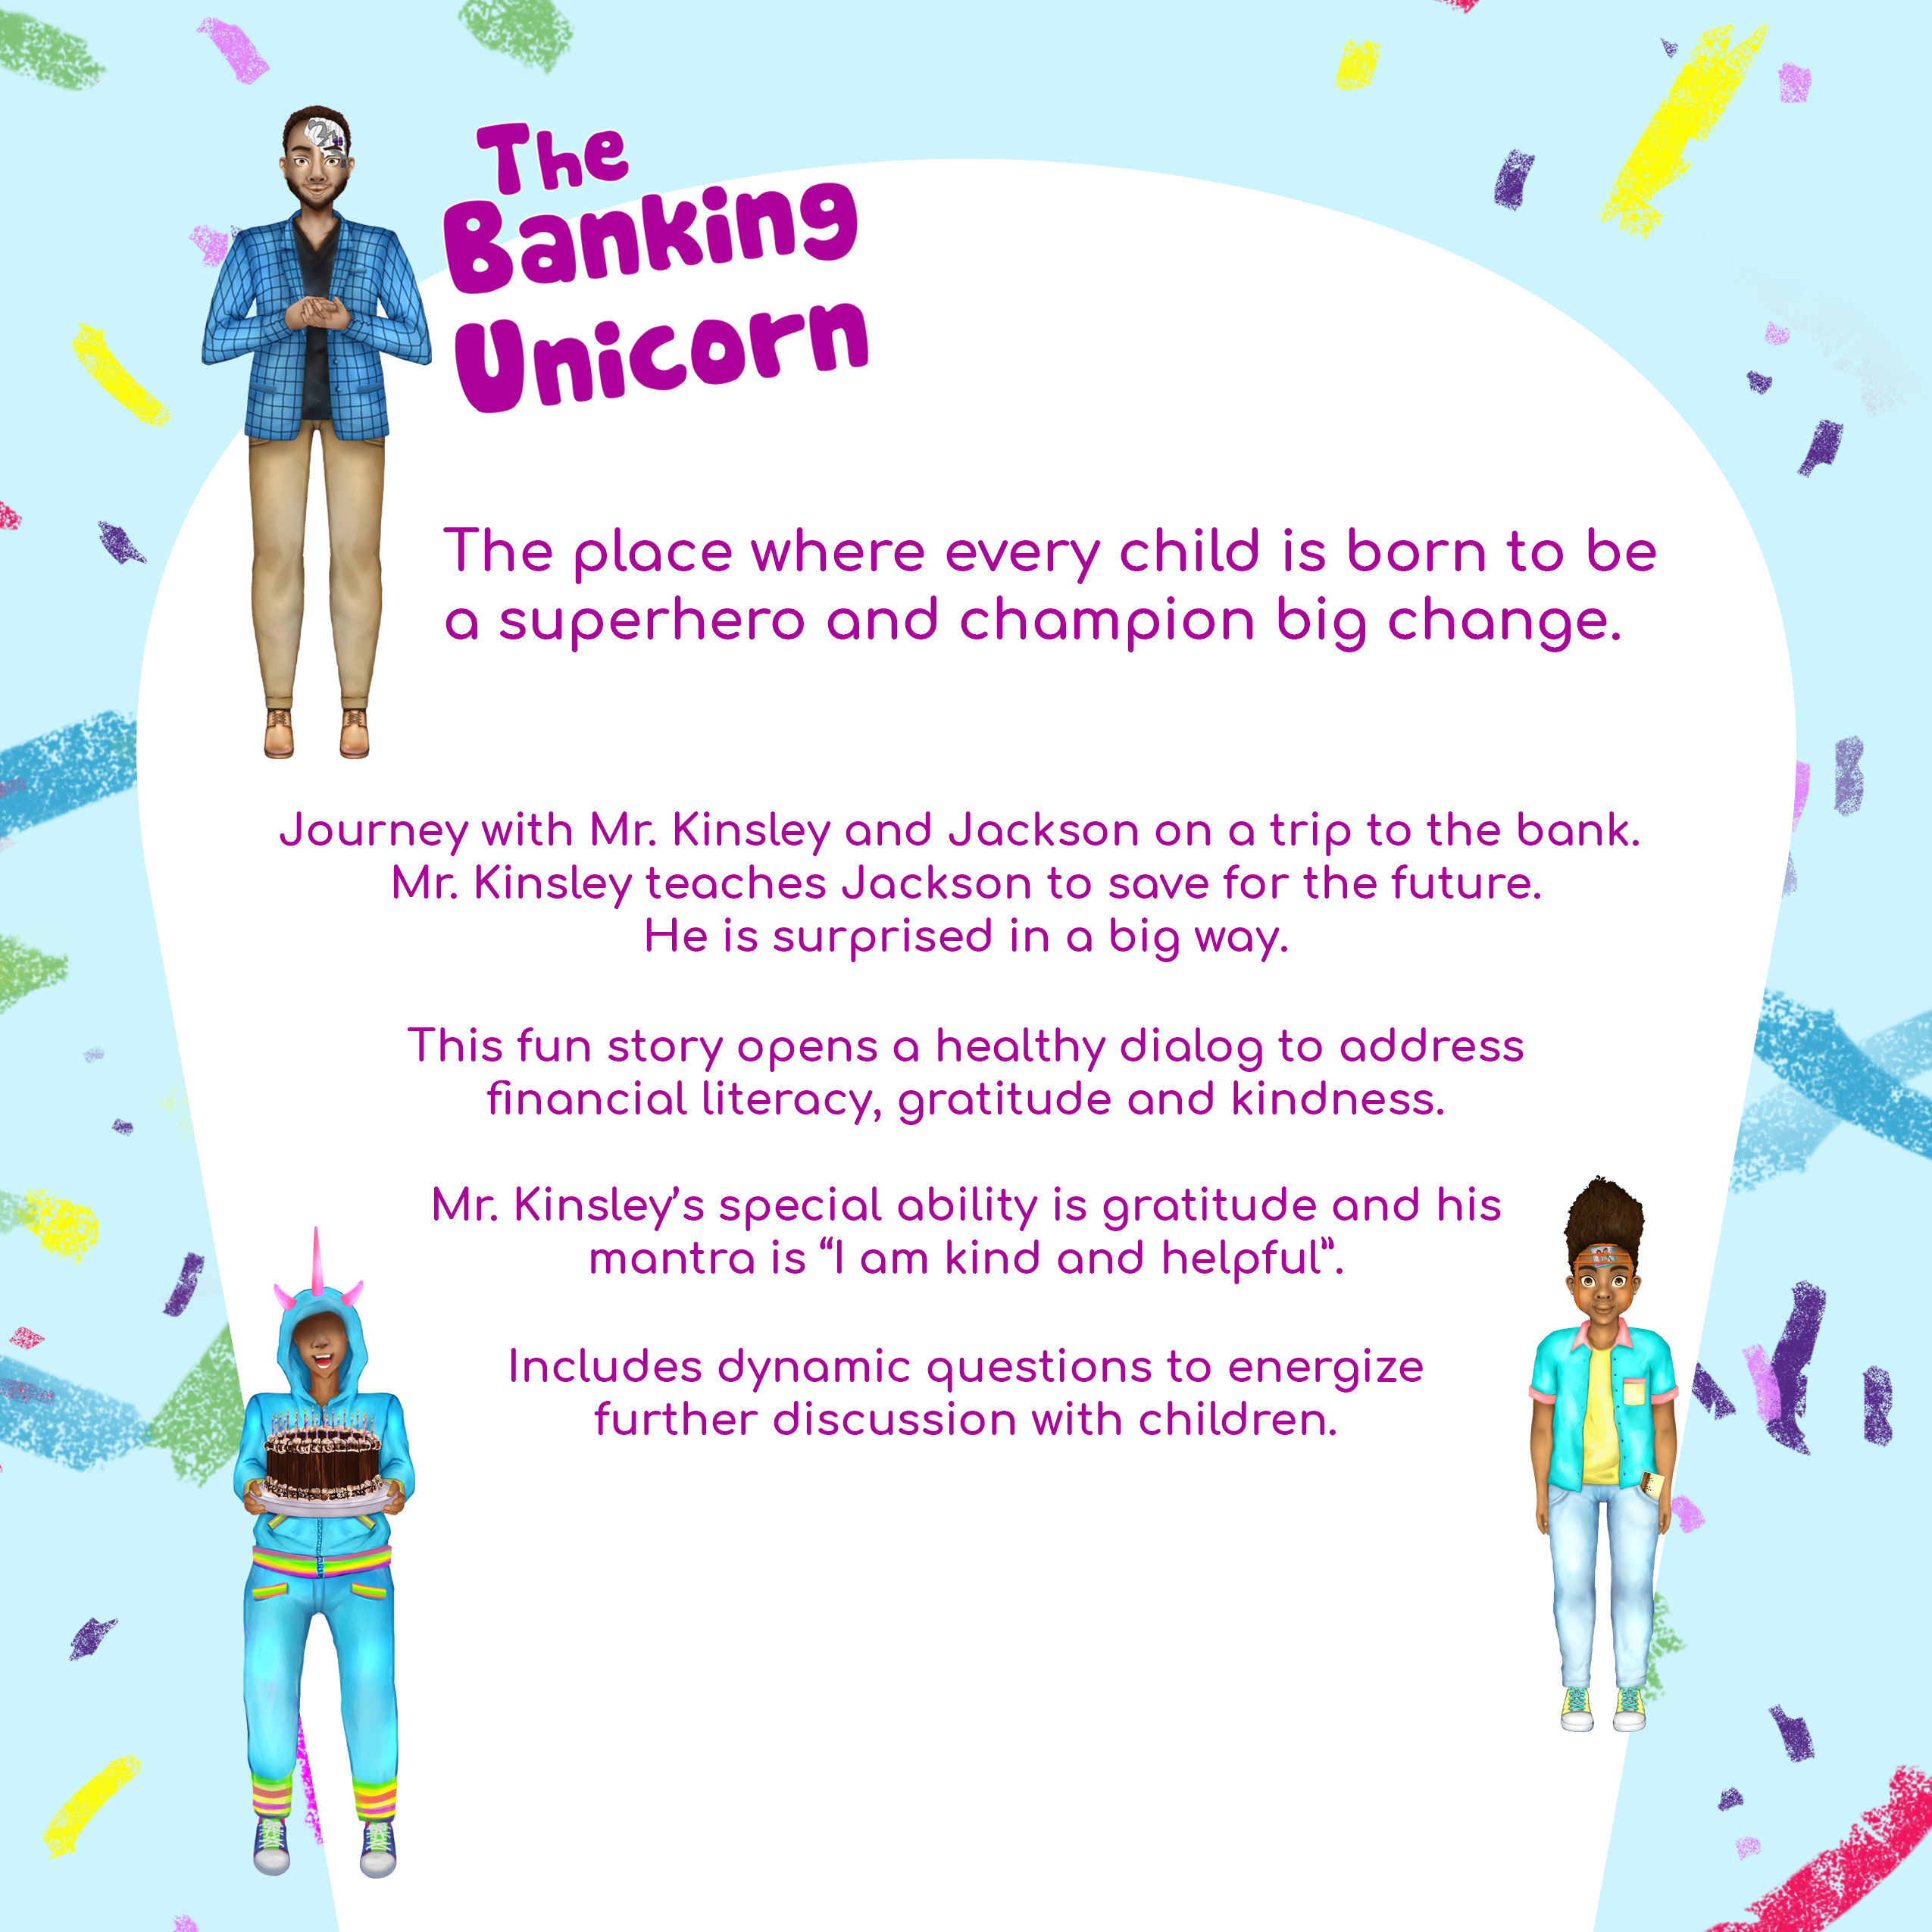 The Banking Unicorn "EARLY CHILDHOOD FINANCIAL LITERACY"